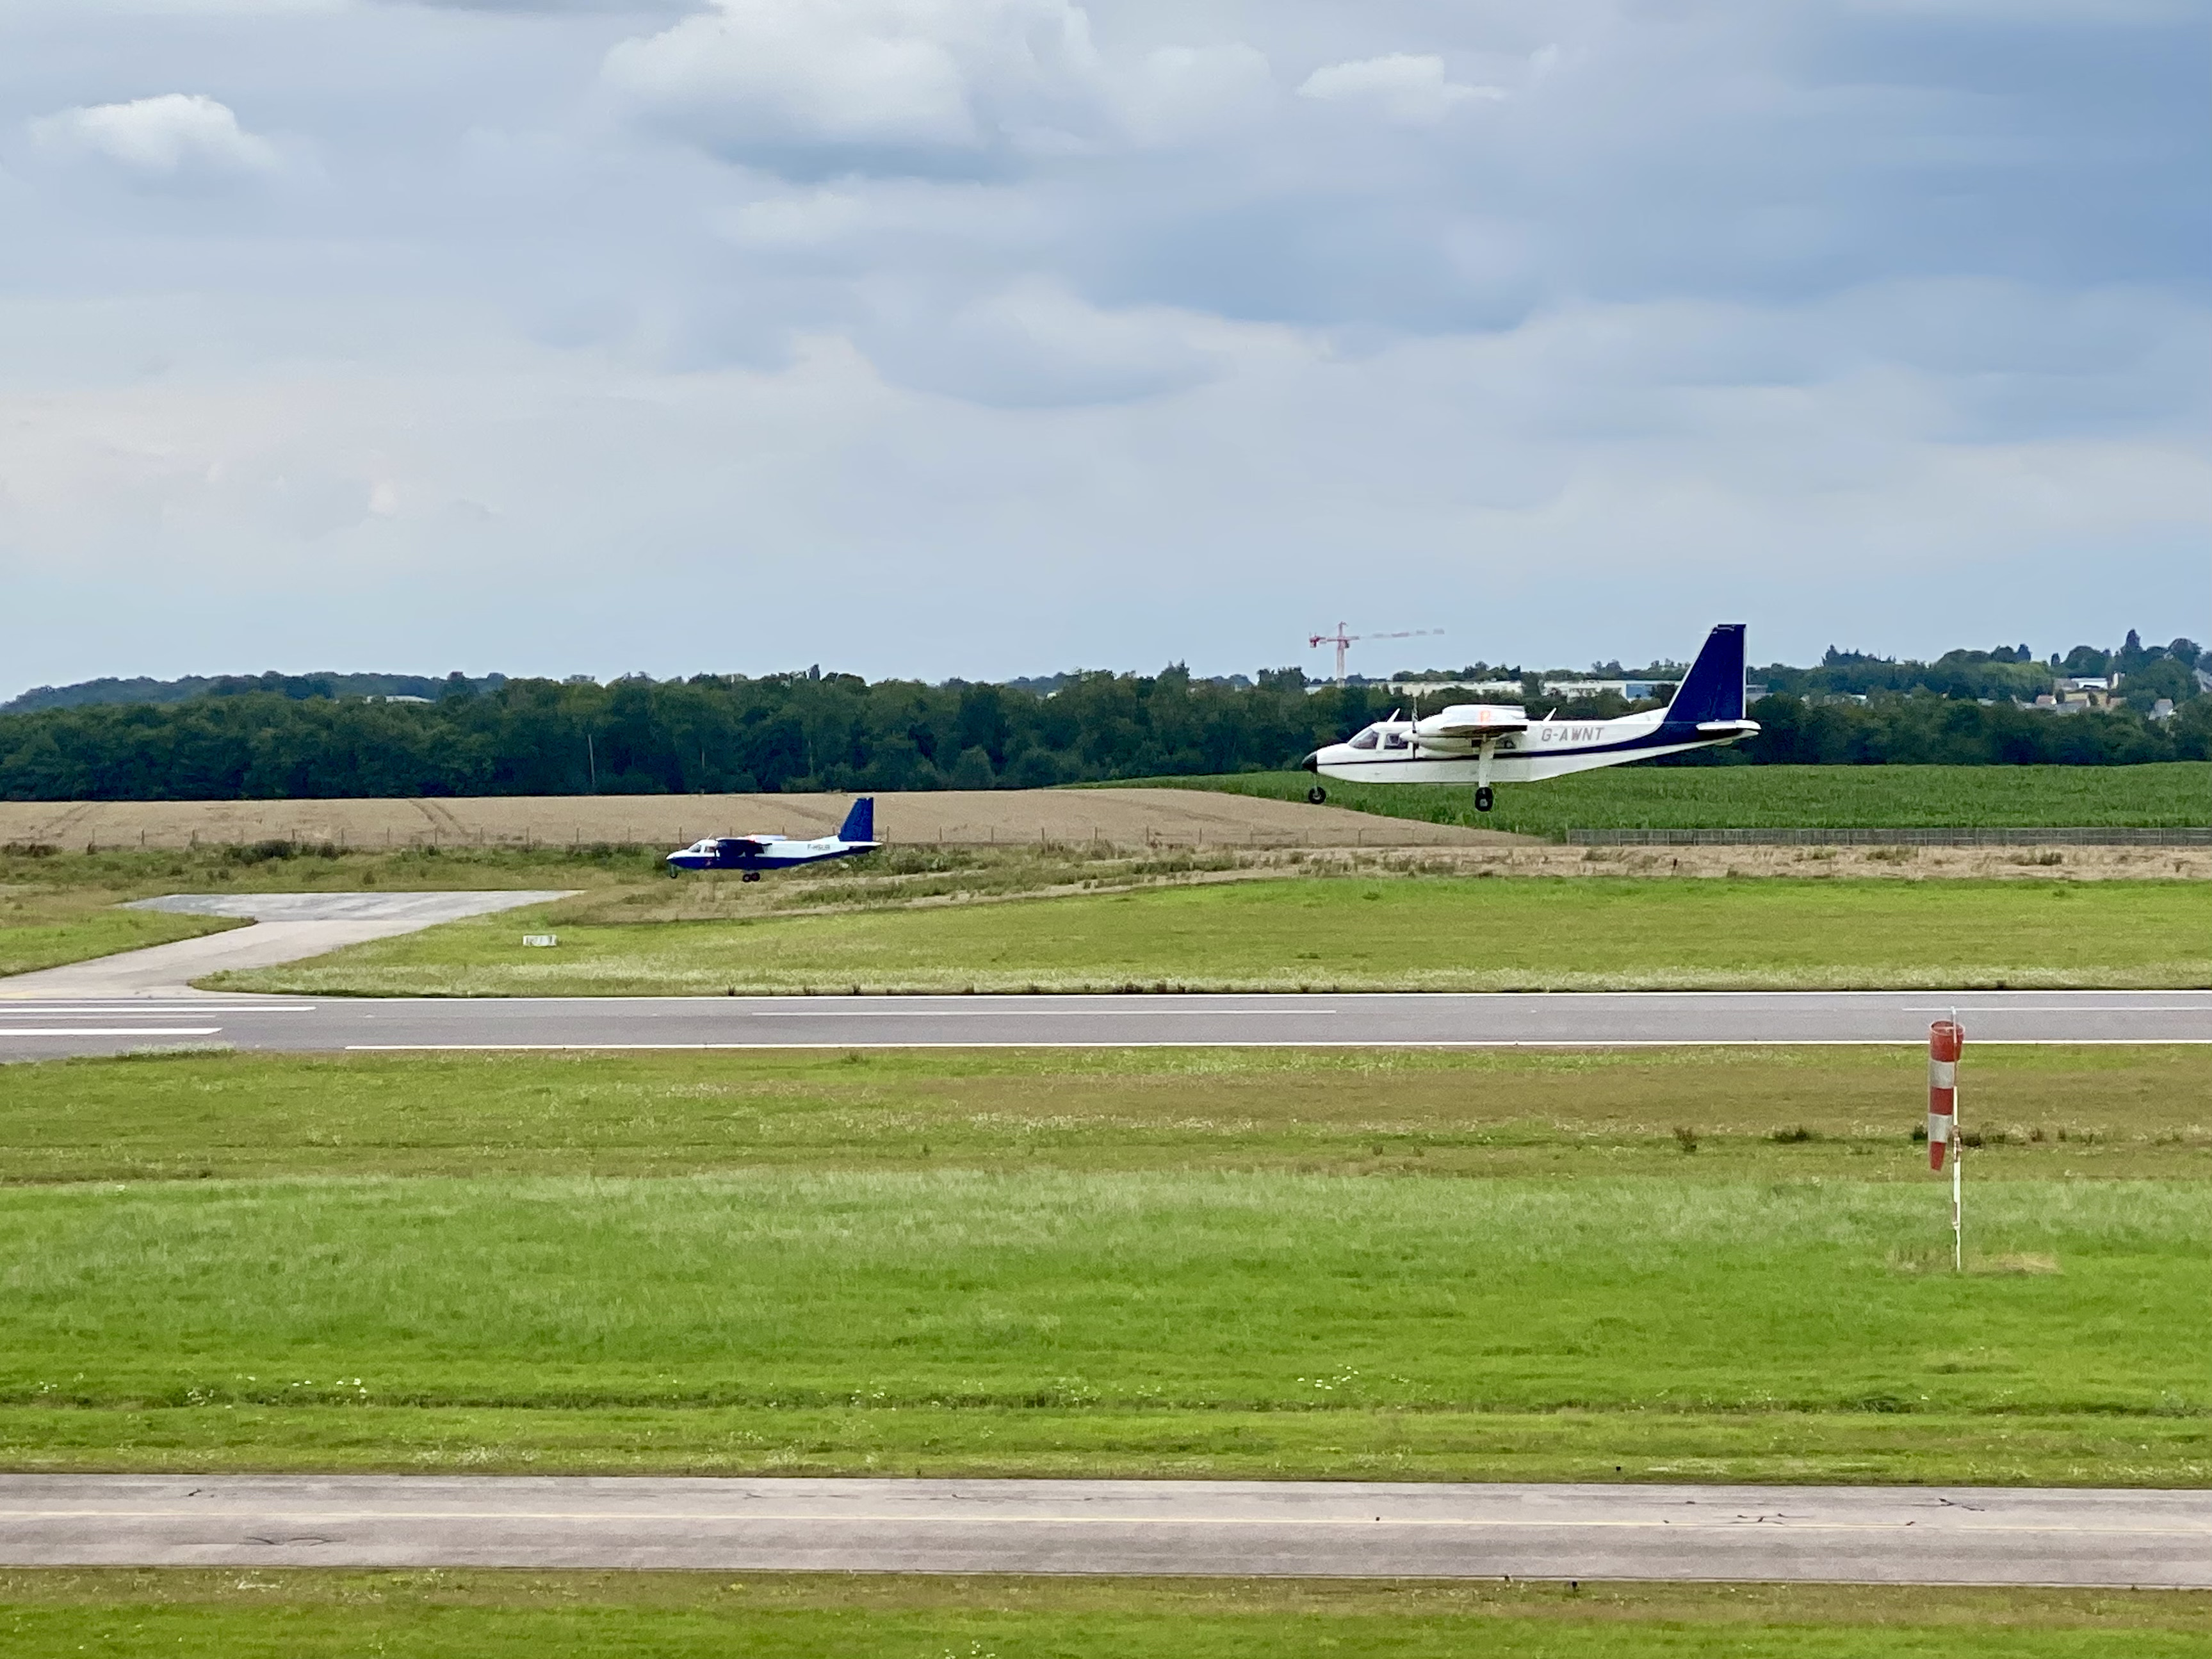 Two BN-2s performing a low pass over the runway in Rouen